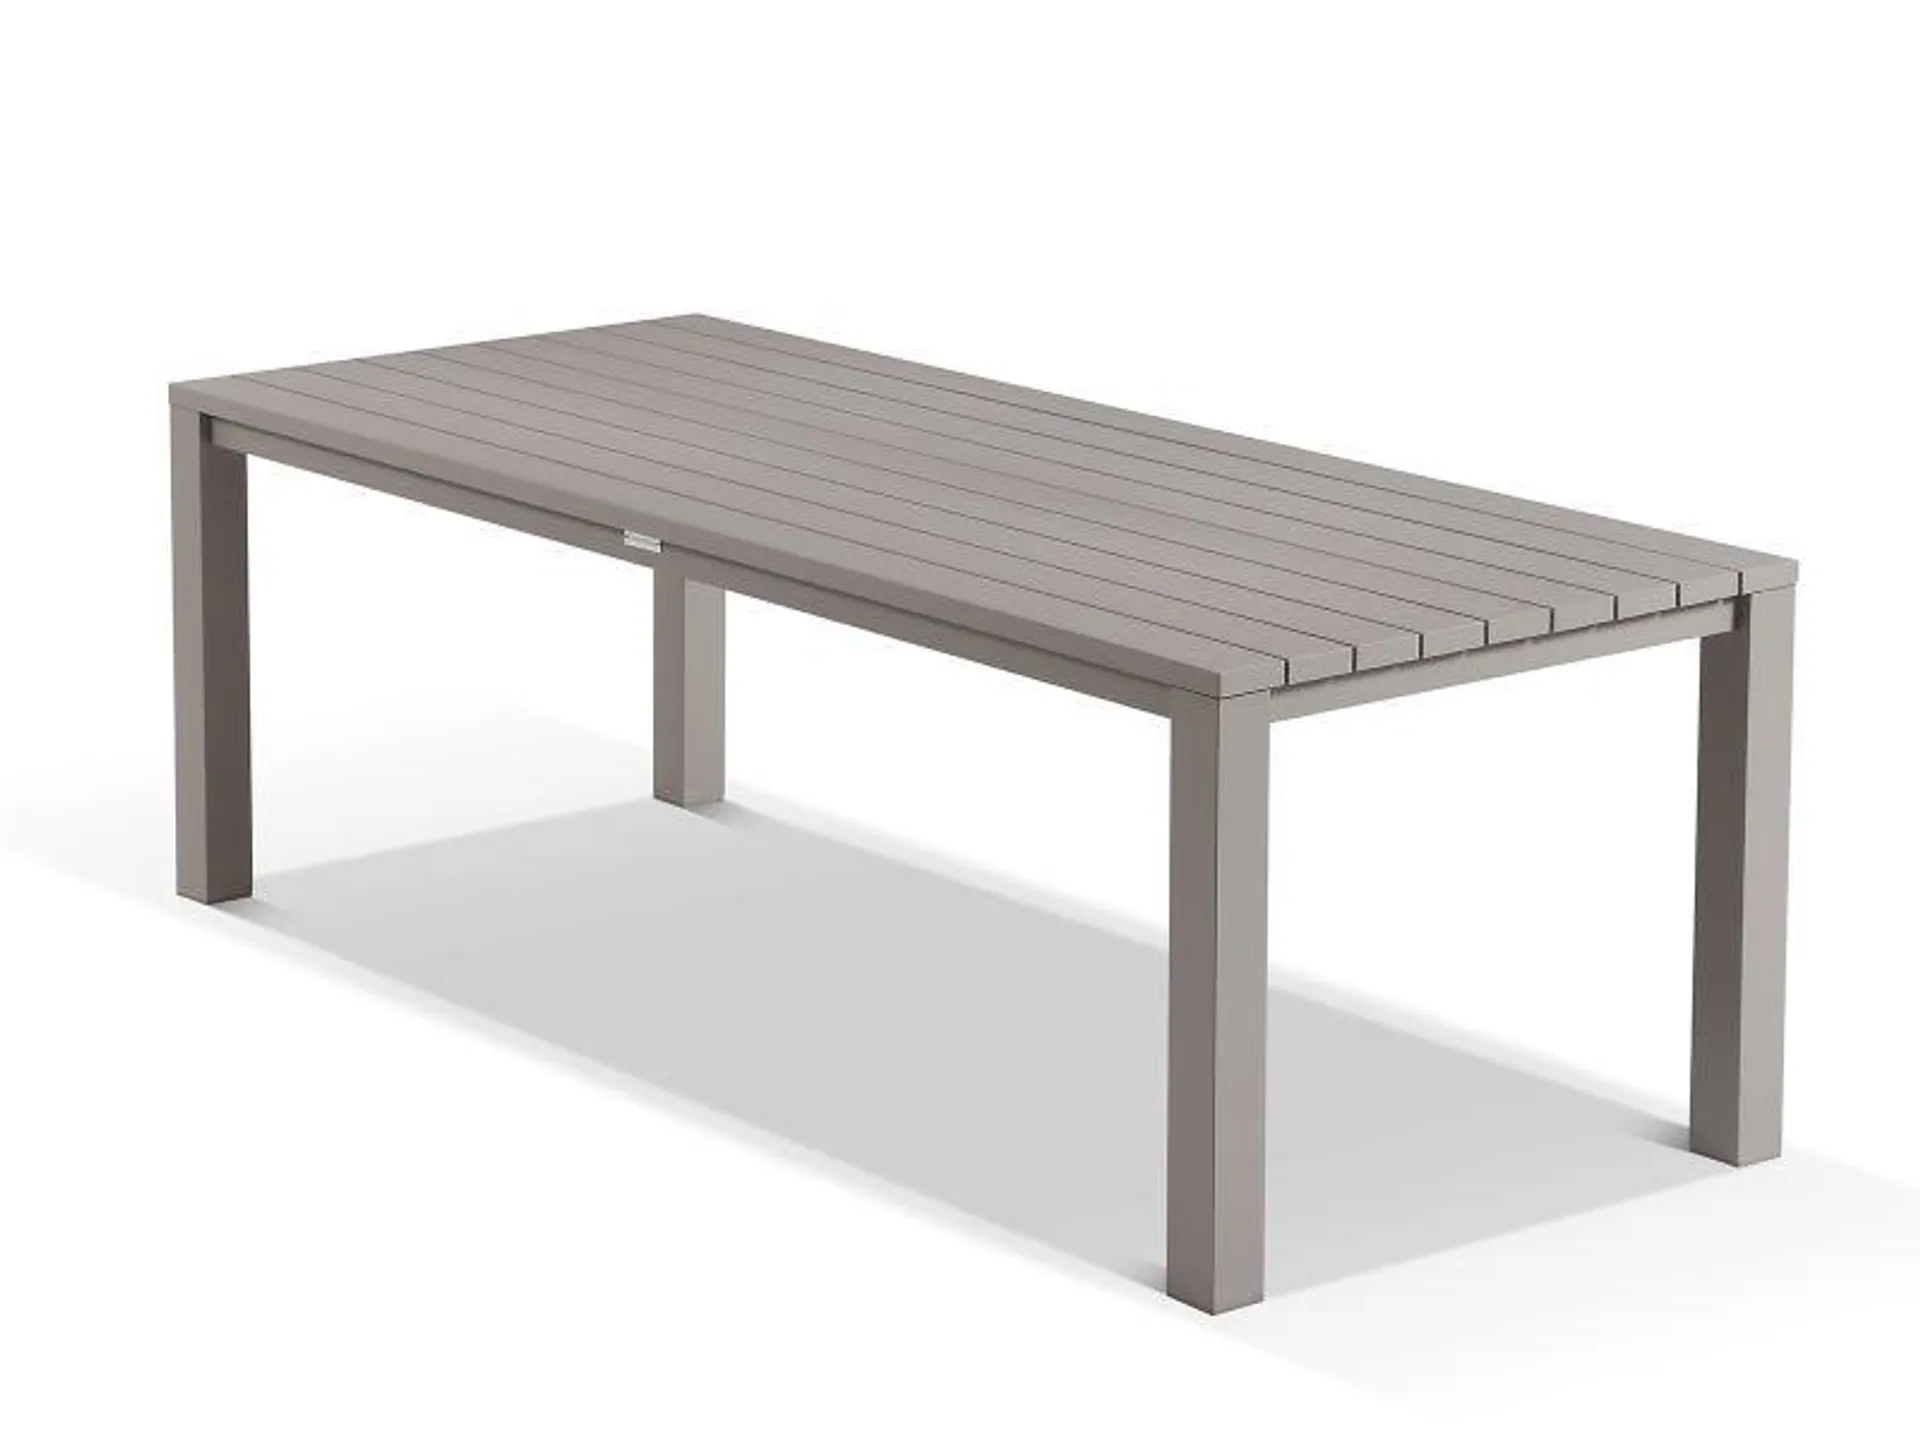 Adele Outdoor Dining Table - 220 x 95cm